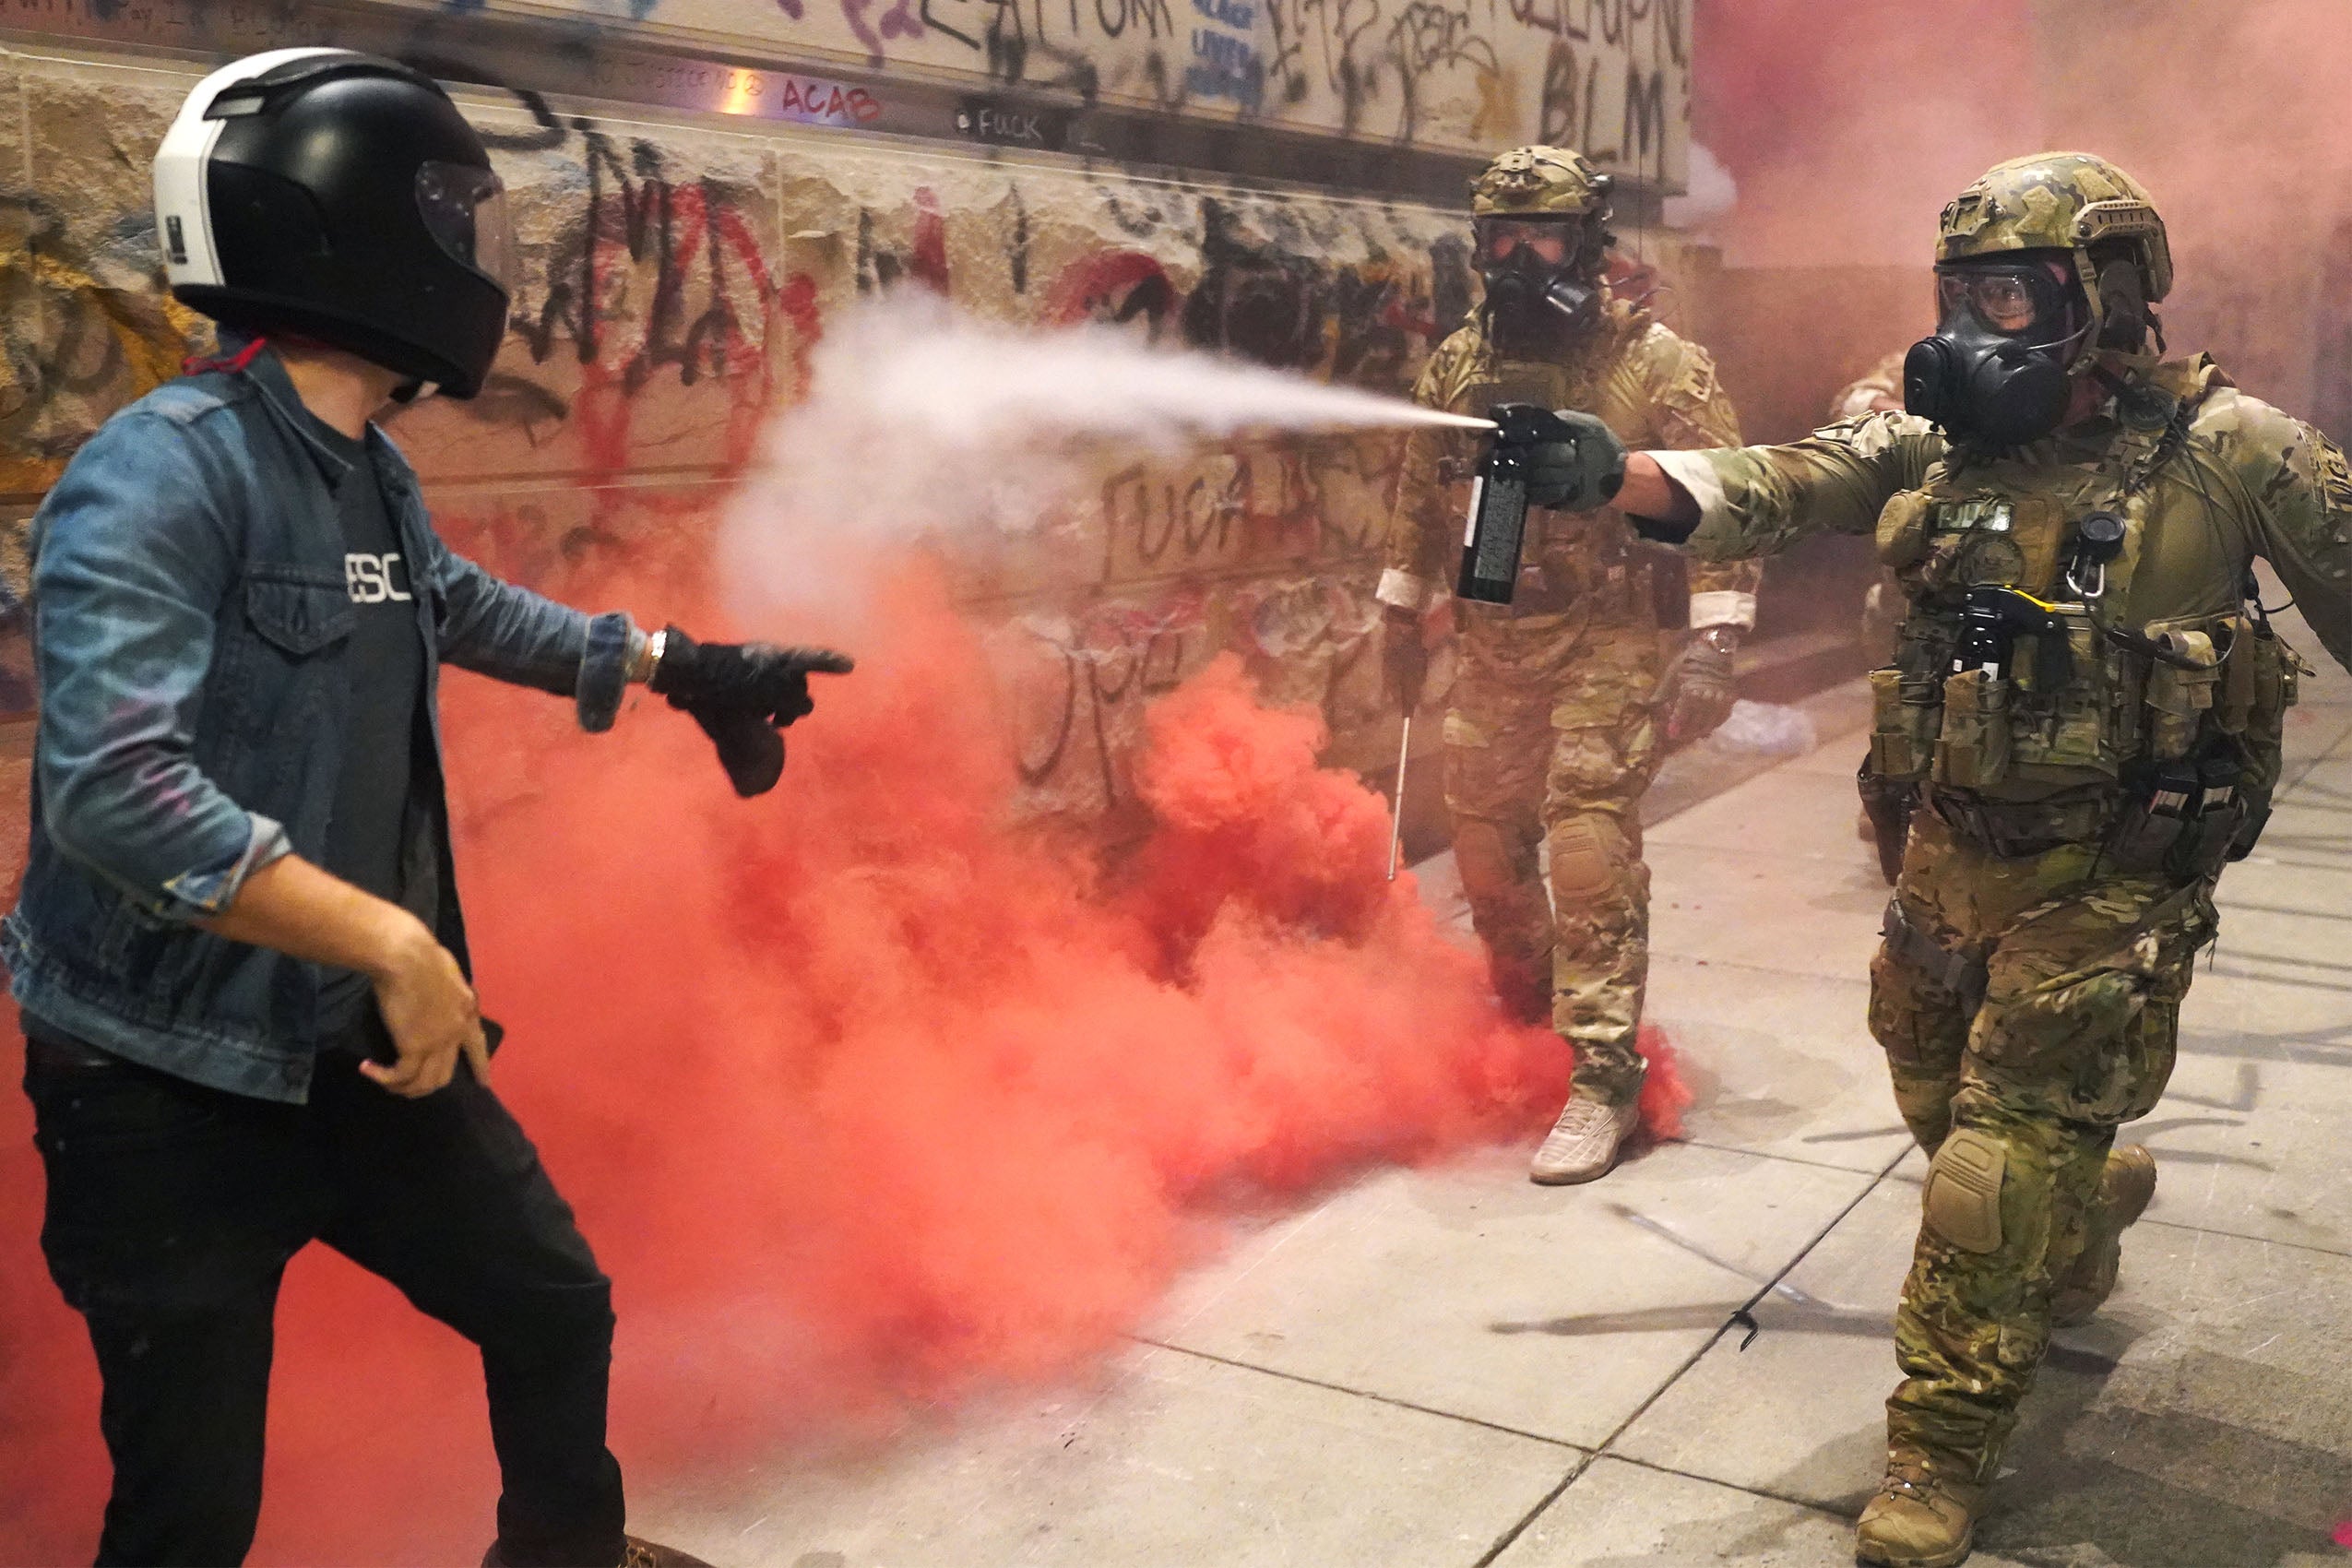 A federal officer in a camouflage uniform wearing a gas mask pepper sprays a protester wearing a motorcycle helmet next to a graffiti covered building.